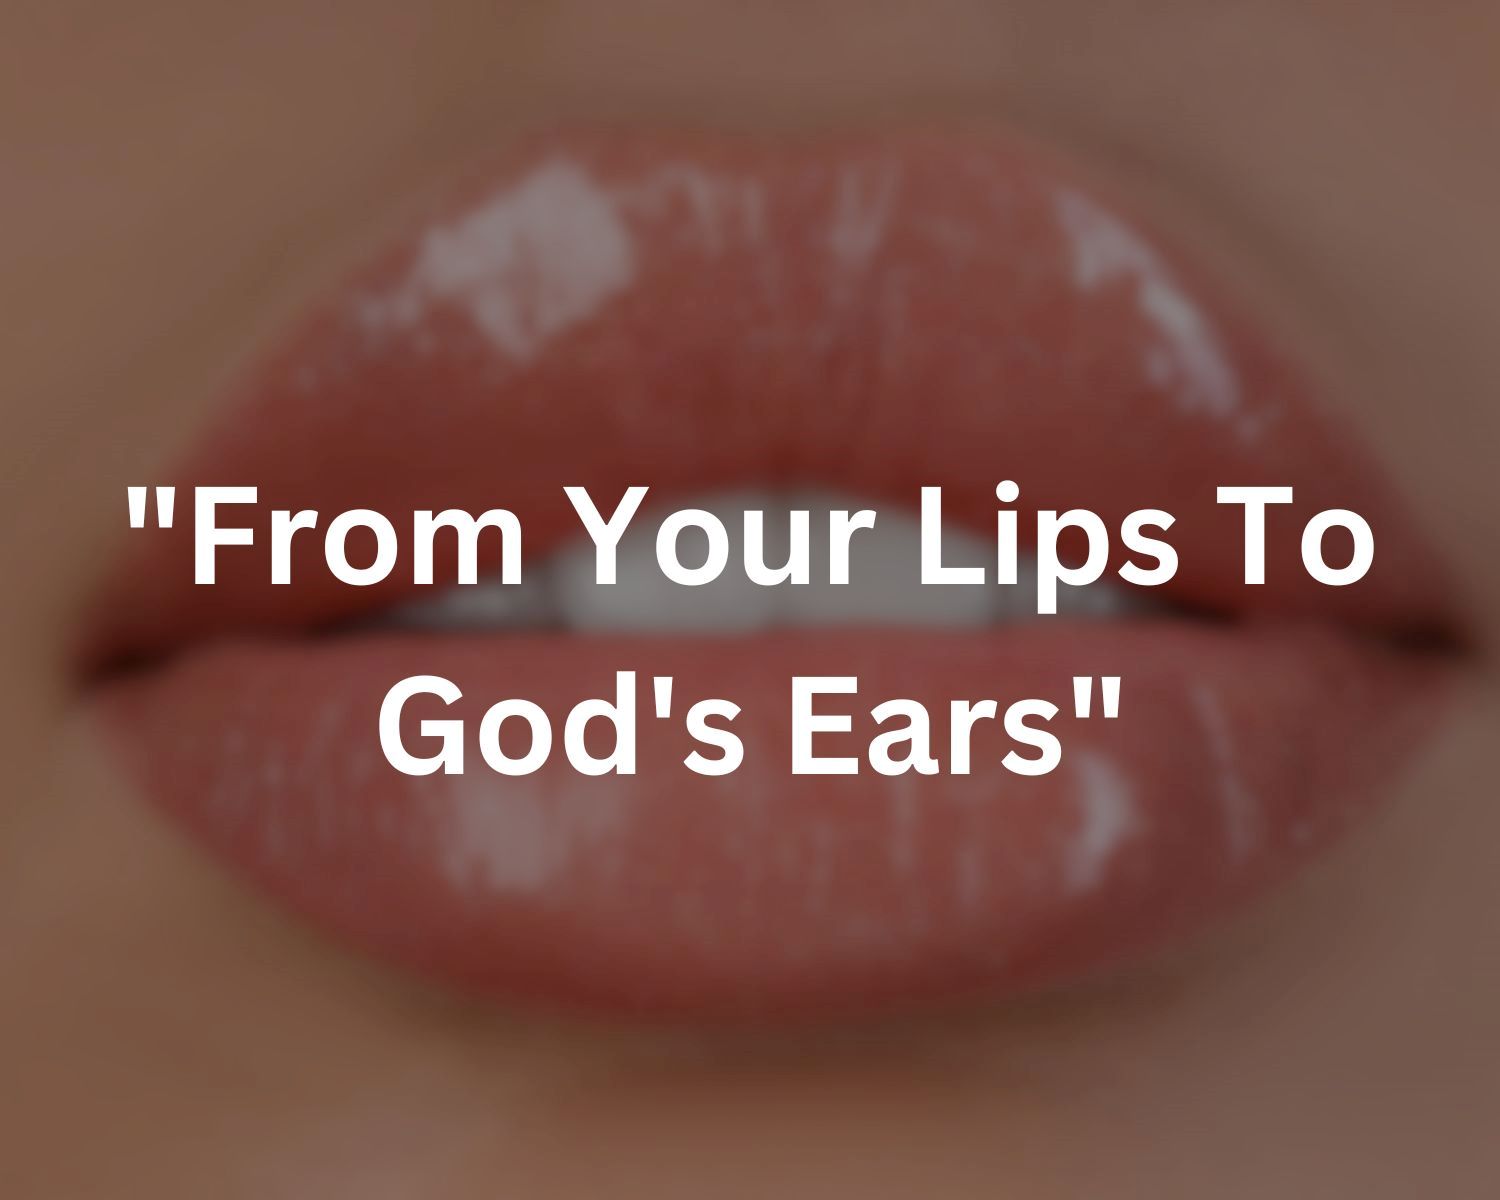 Unveiling The Origin And Meaning Of “From Your Lips To God’s Ears”